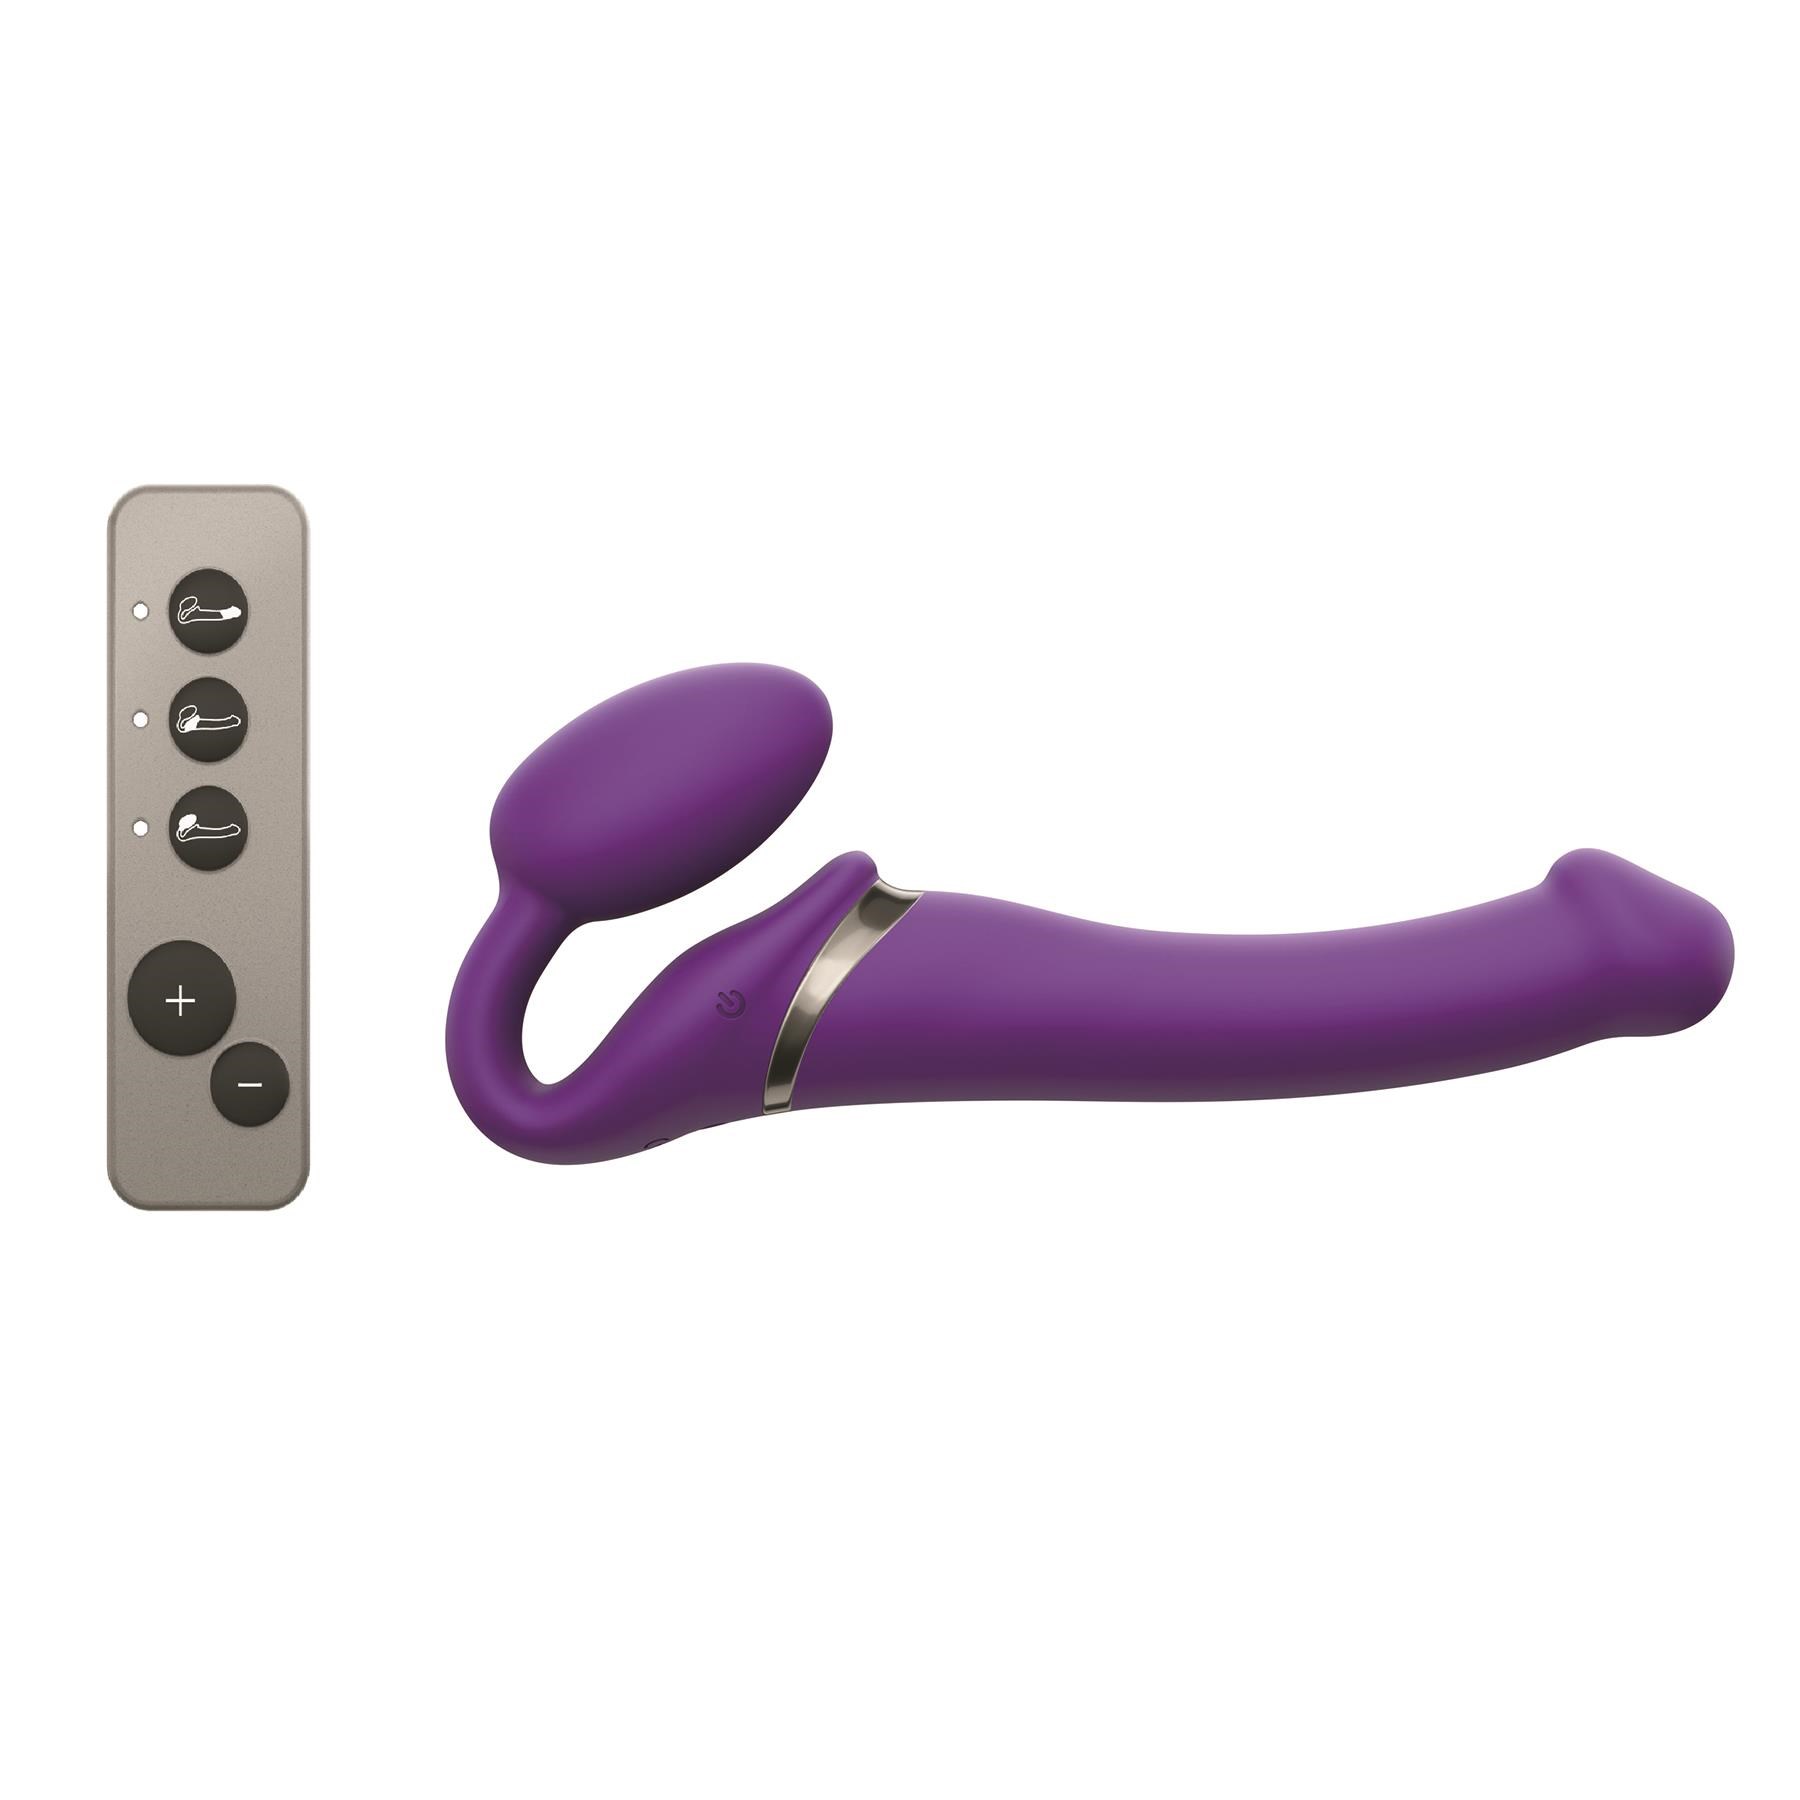 Strap On Me Rechargeable Strapless Strap-On With Remote Product Shot